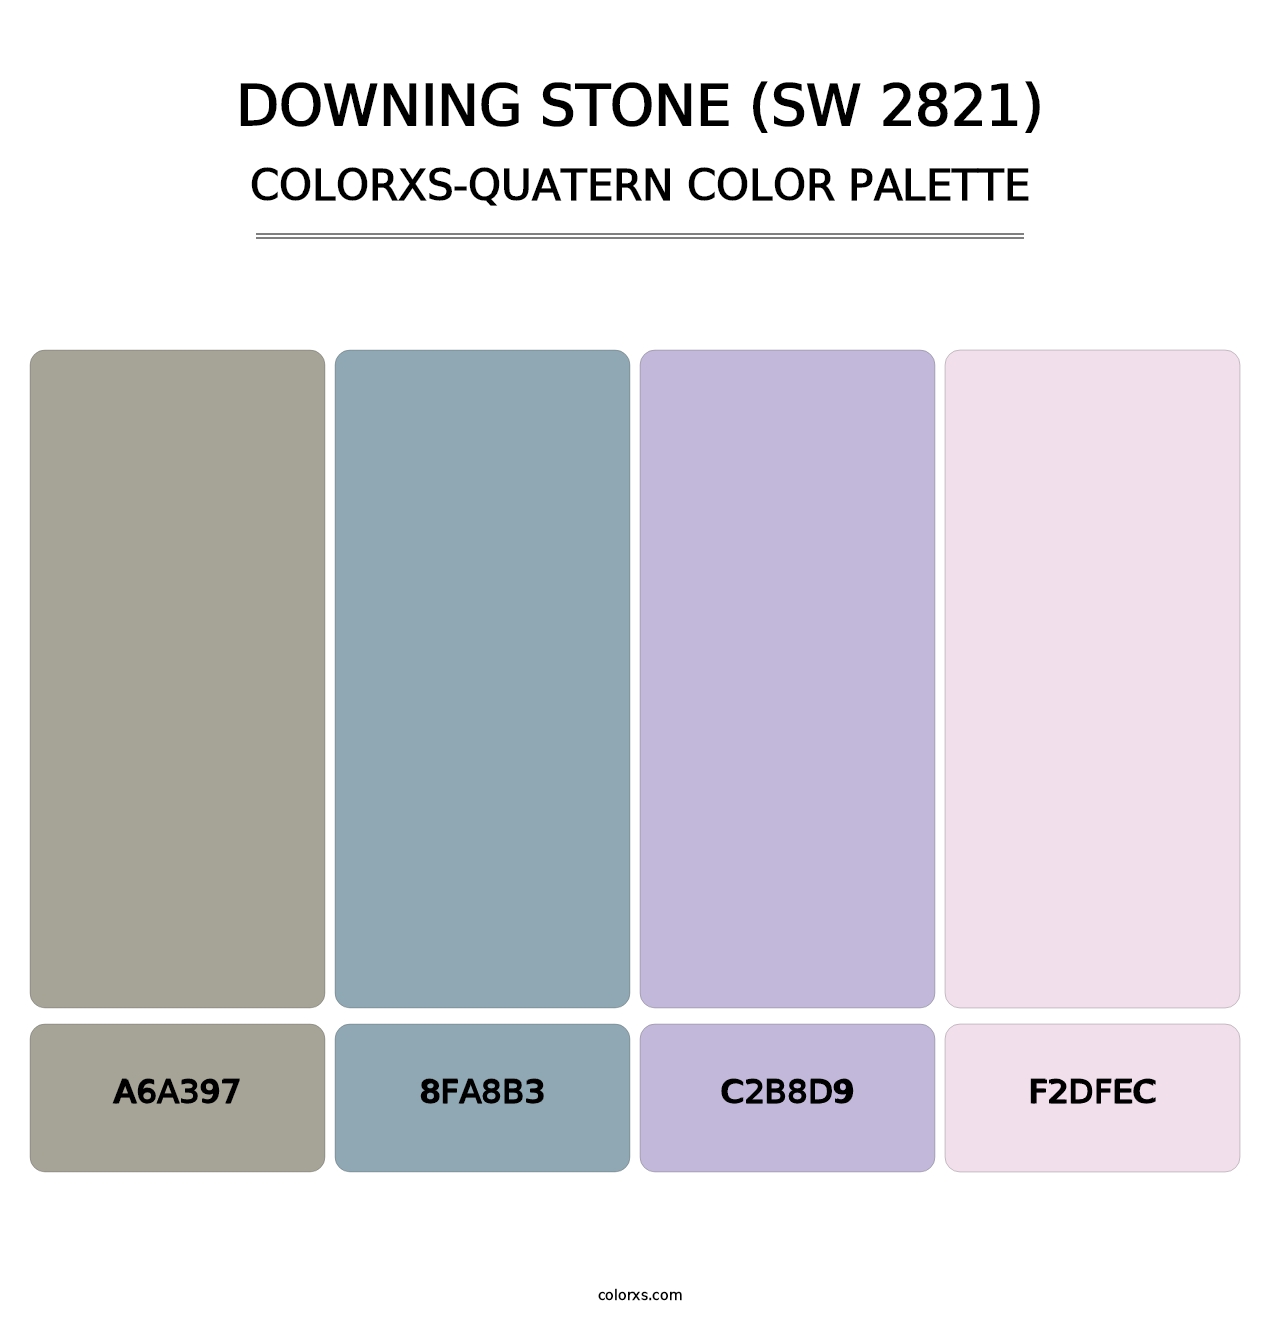 Downing Stone (SW 2821) - Colorxs Quatern Palette